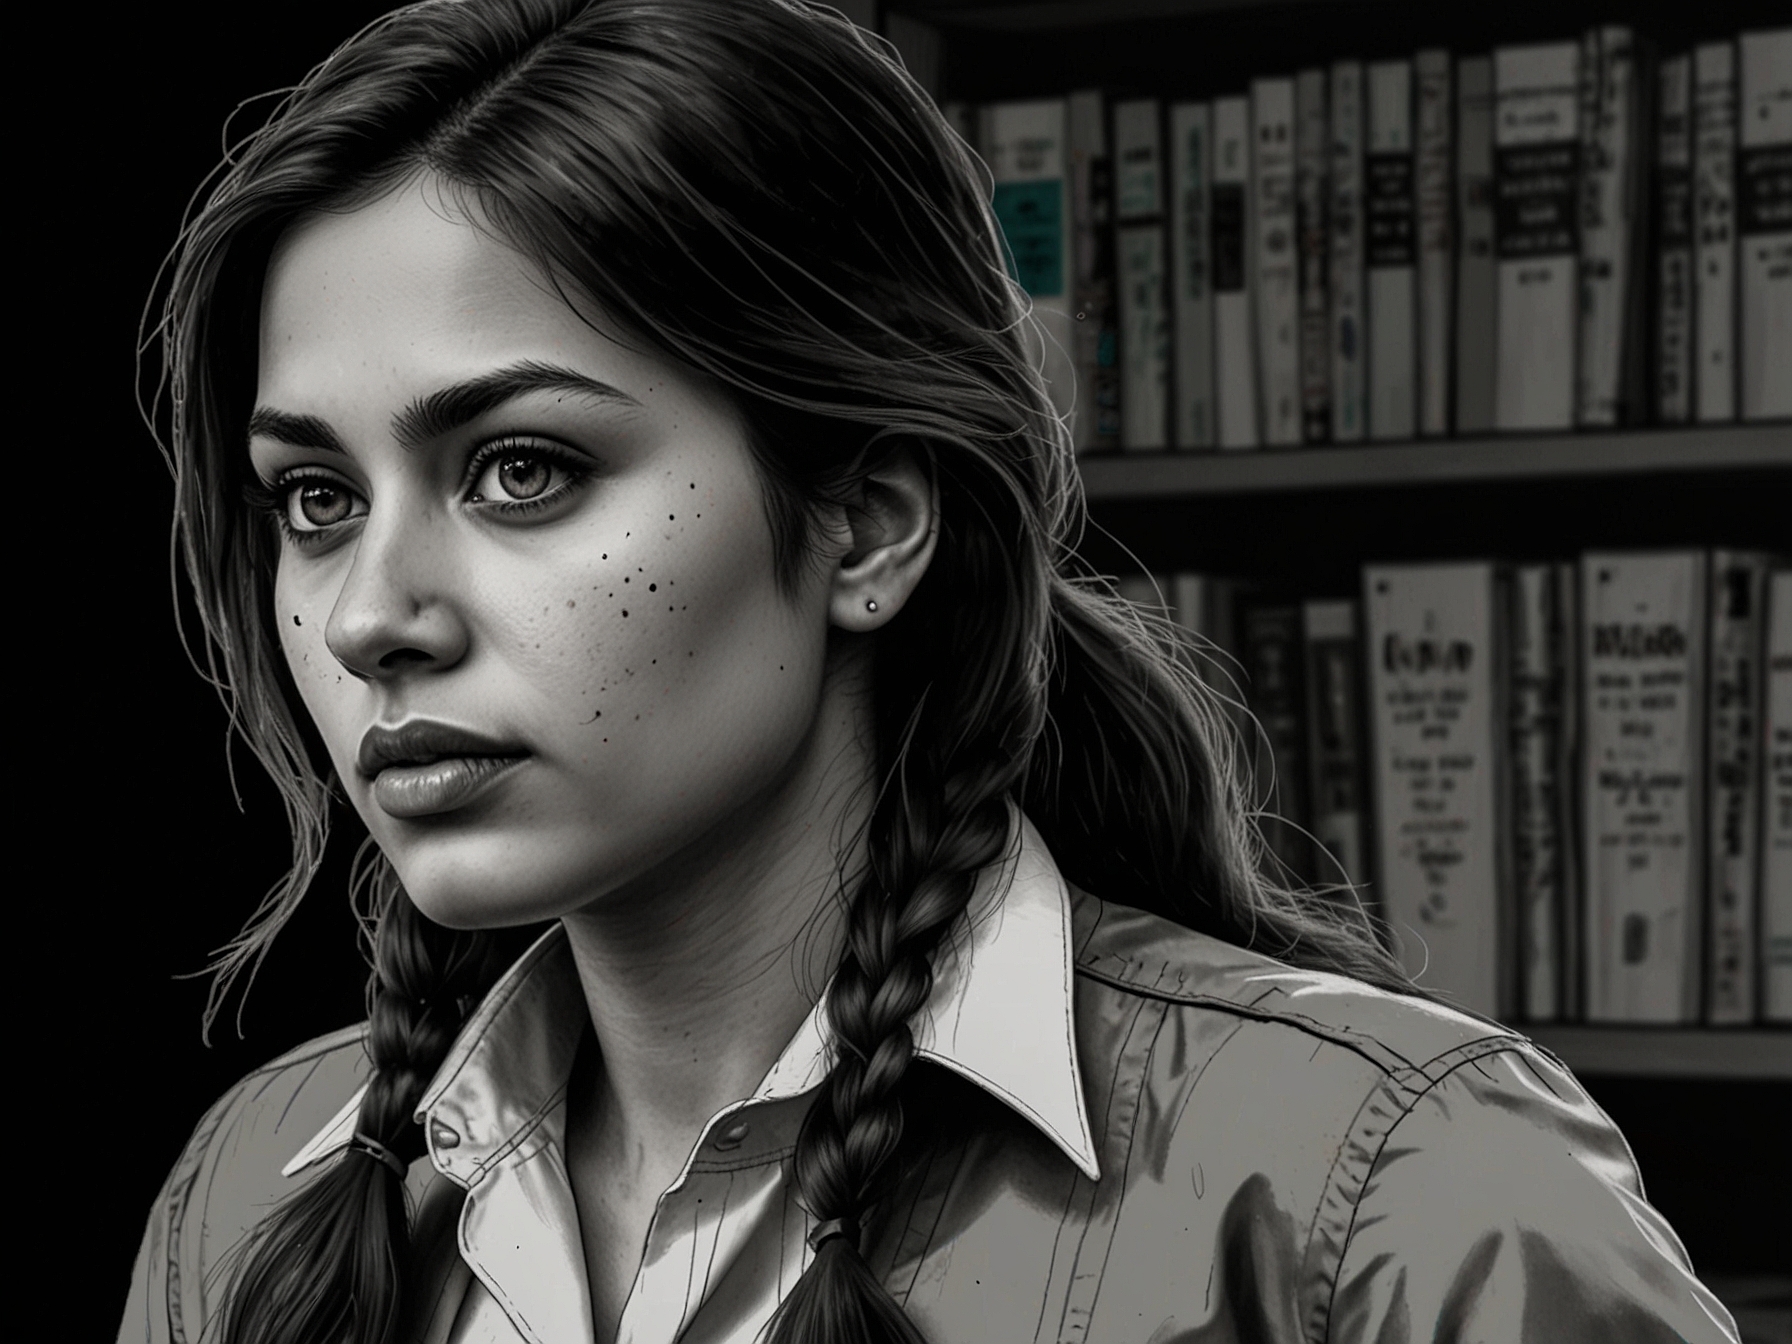 Rhea, an investigative reporter portrayed by Harleen Sethi, discovers critical evidence, adding new layers to the kidnapping case, highlighting her growing role in the investigation.